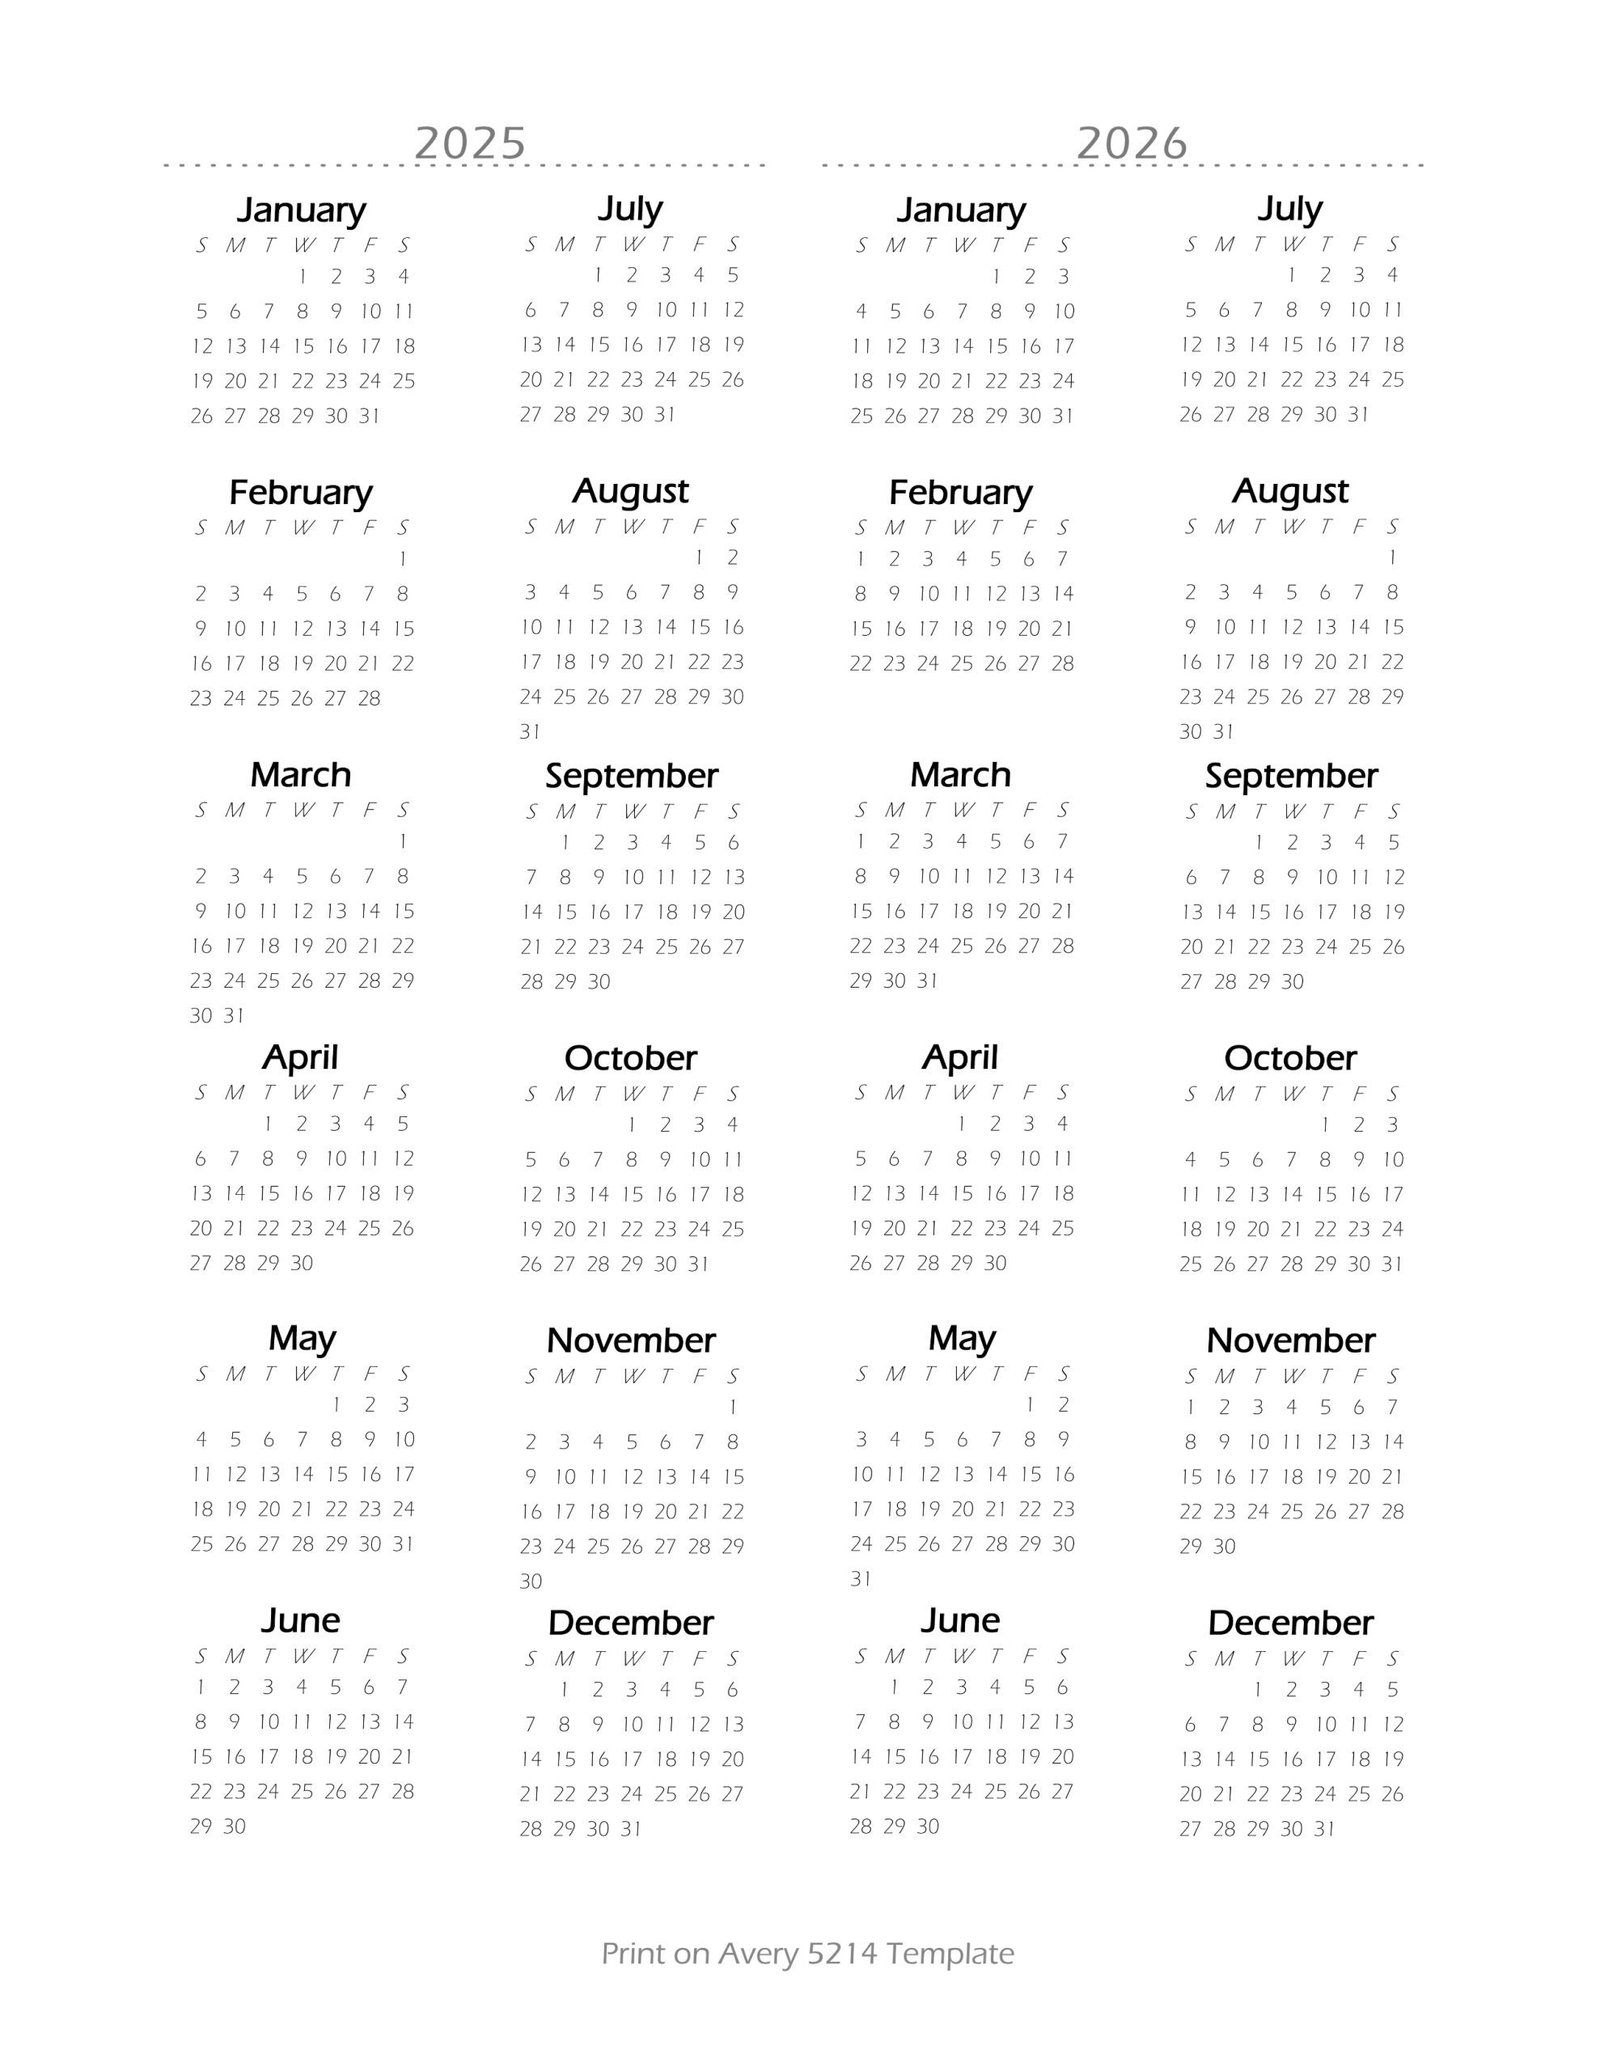 Printable calendar stickers! Lots of different ones at site, Free. I'd use  paper and reposit…